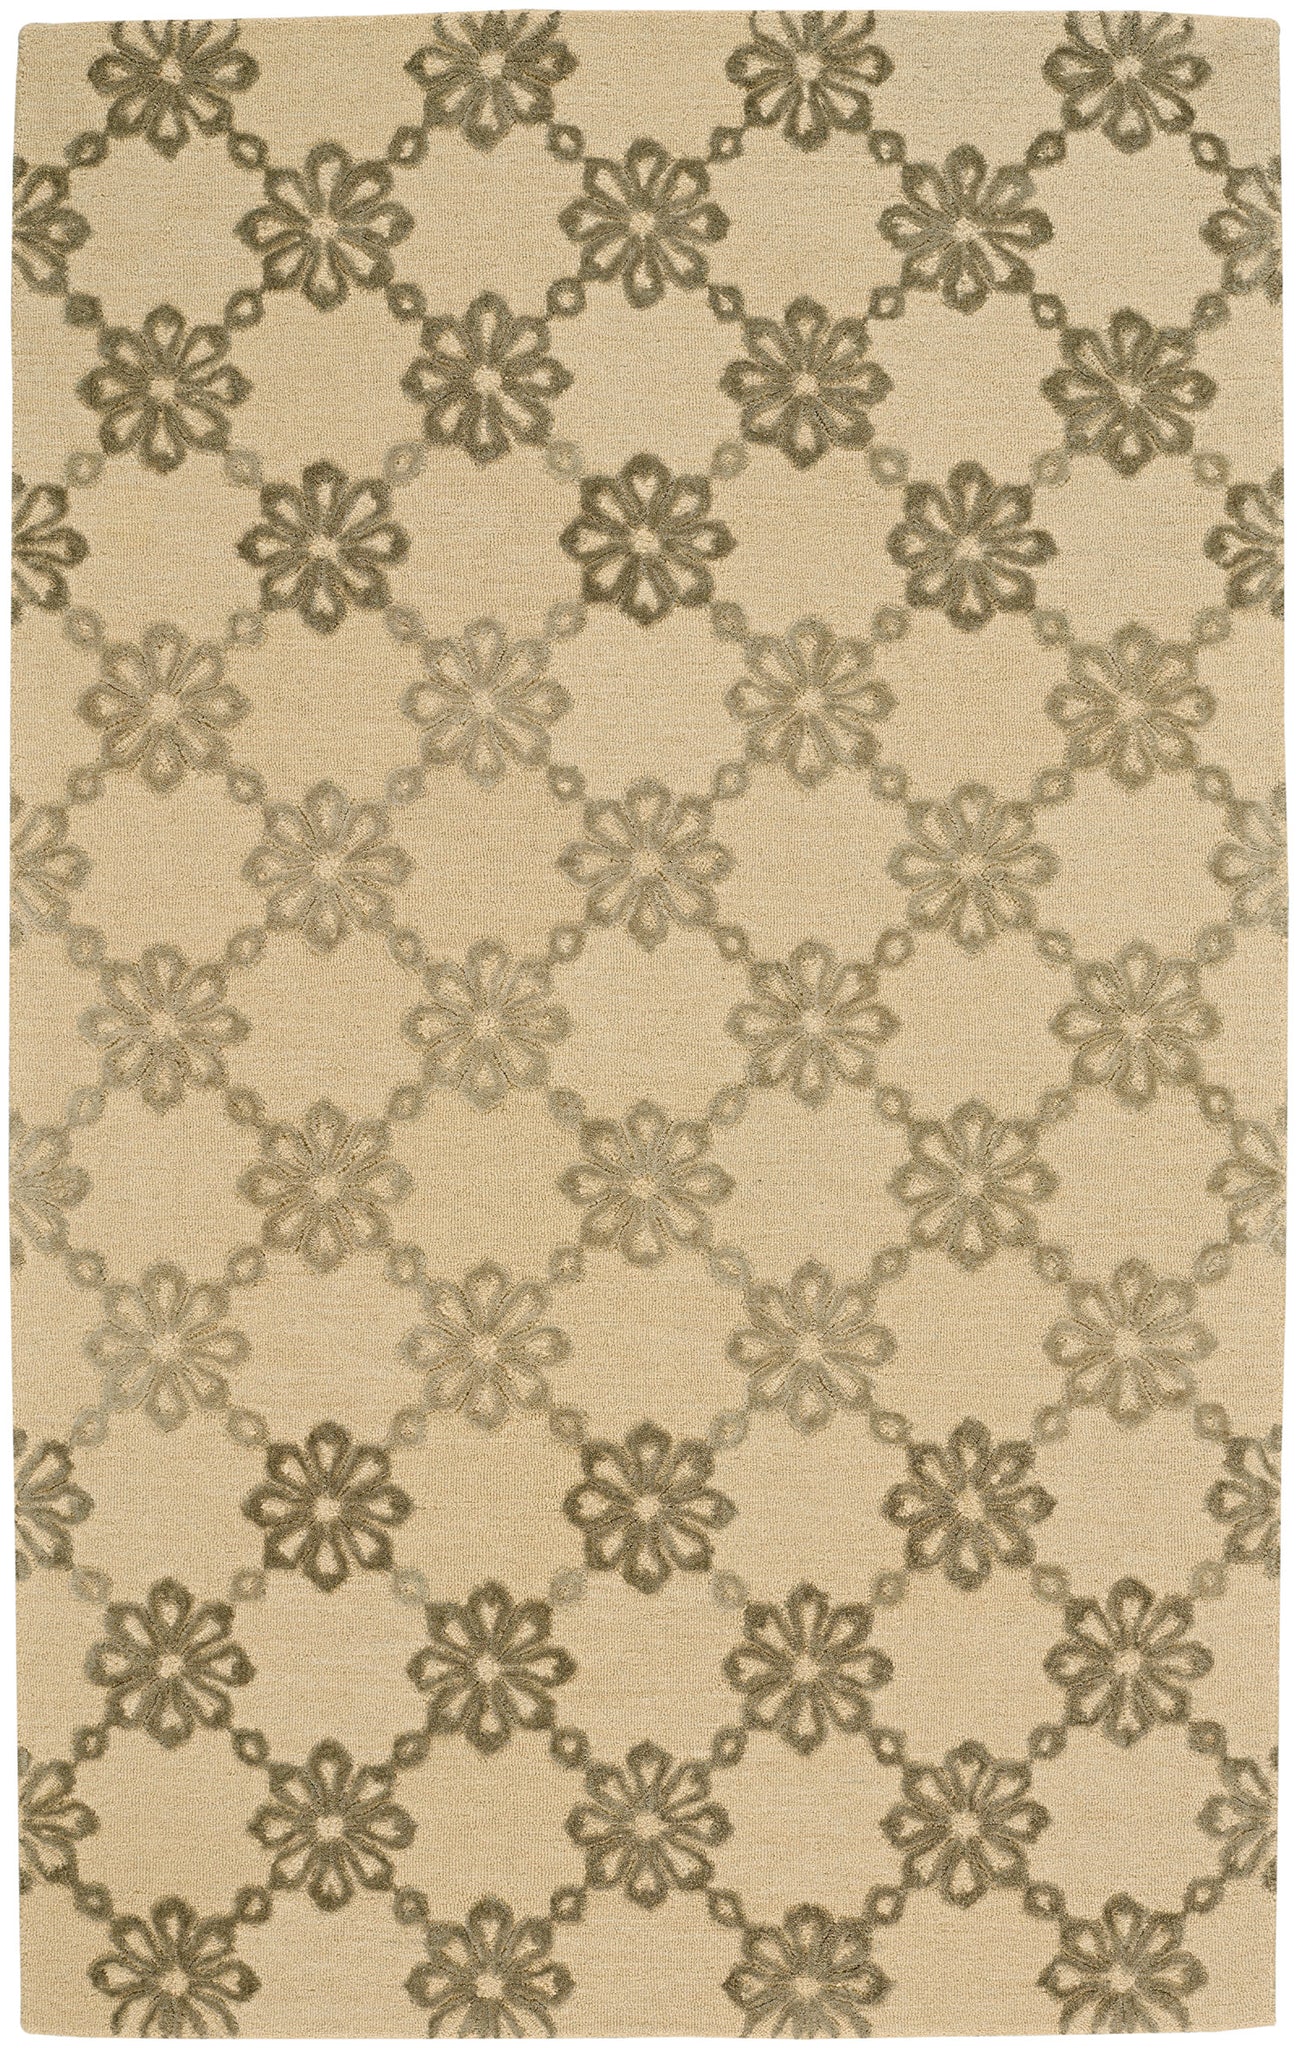 Capel Link 9198 Butter 100 Area Rug main image